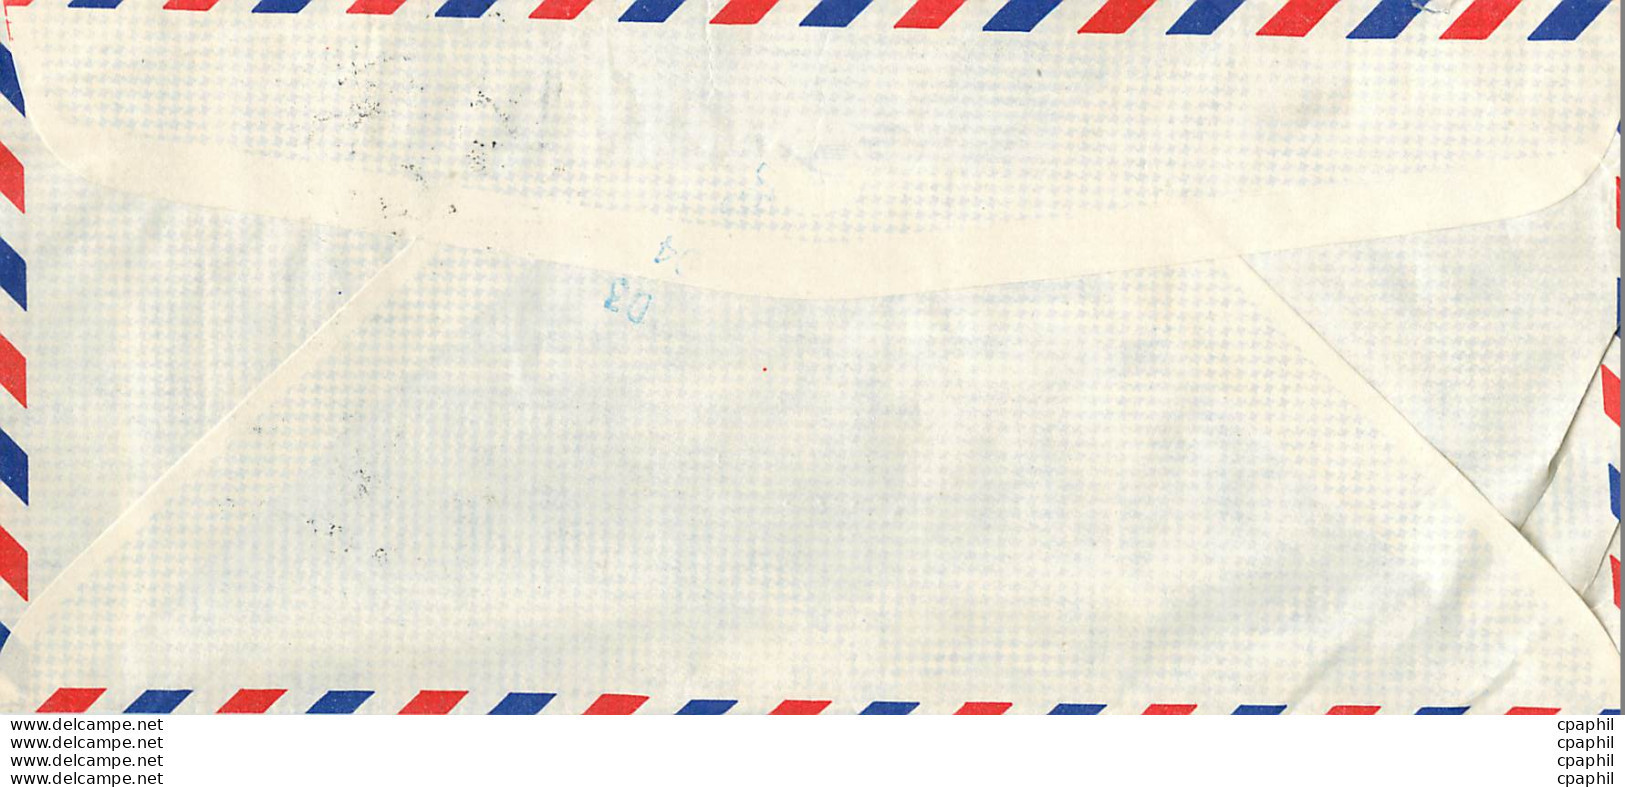 Lettre Cover Chine China University Iowa Cheng Kung - Lettres & Documents